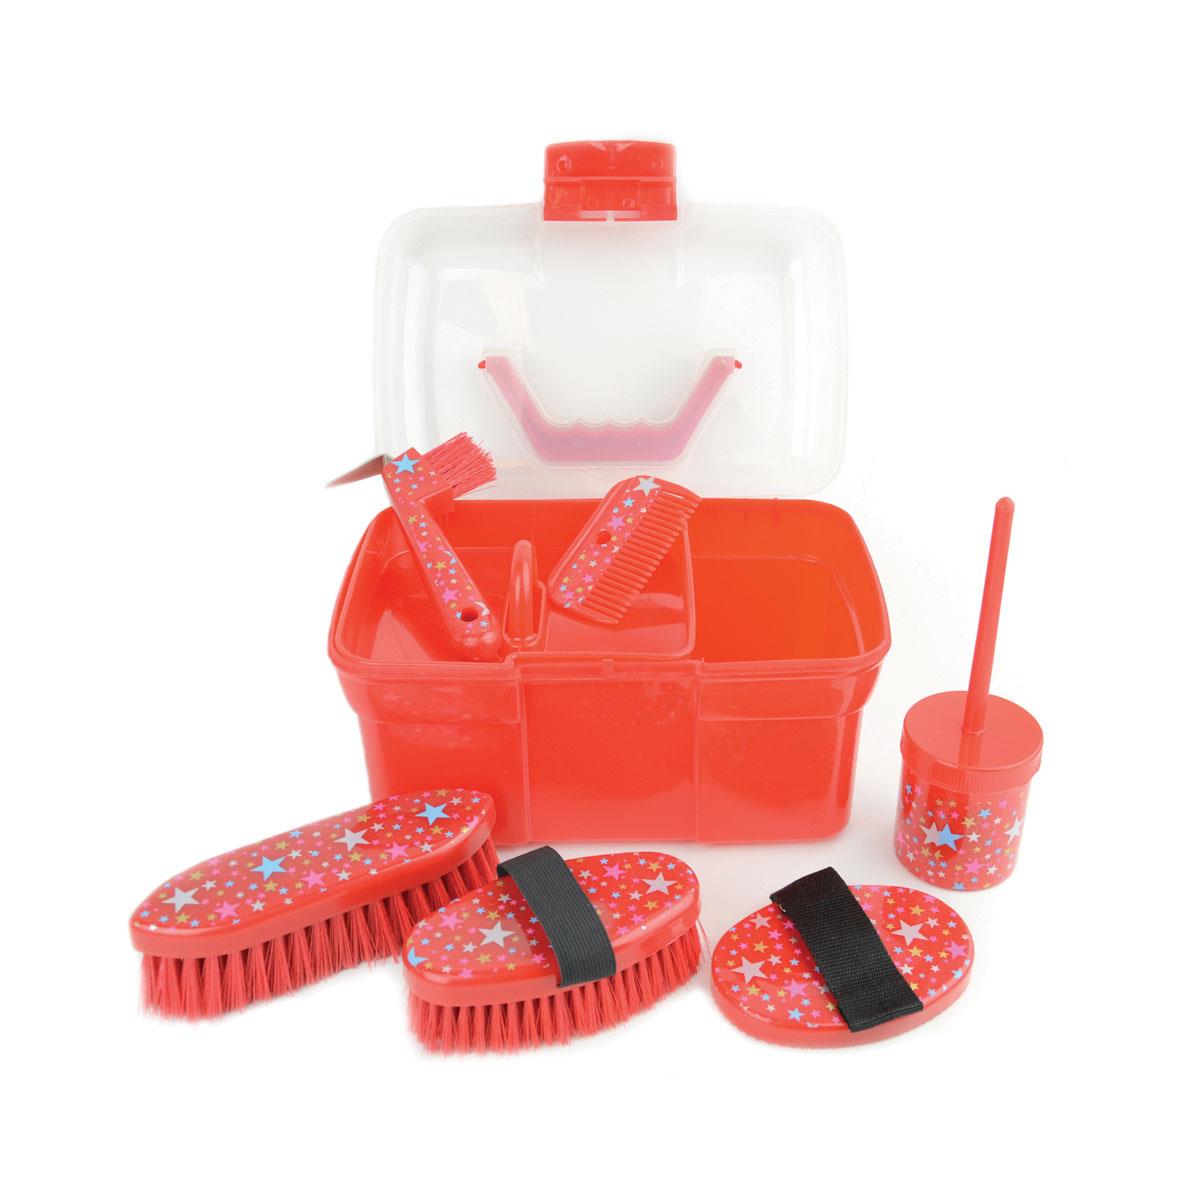 Lincoln Star Pattern Grooming Kit - Just Horse Riders